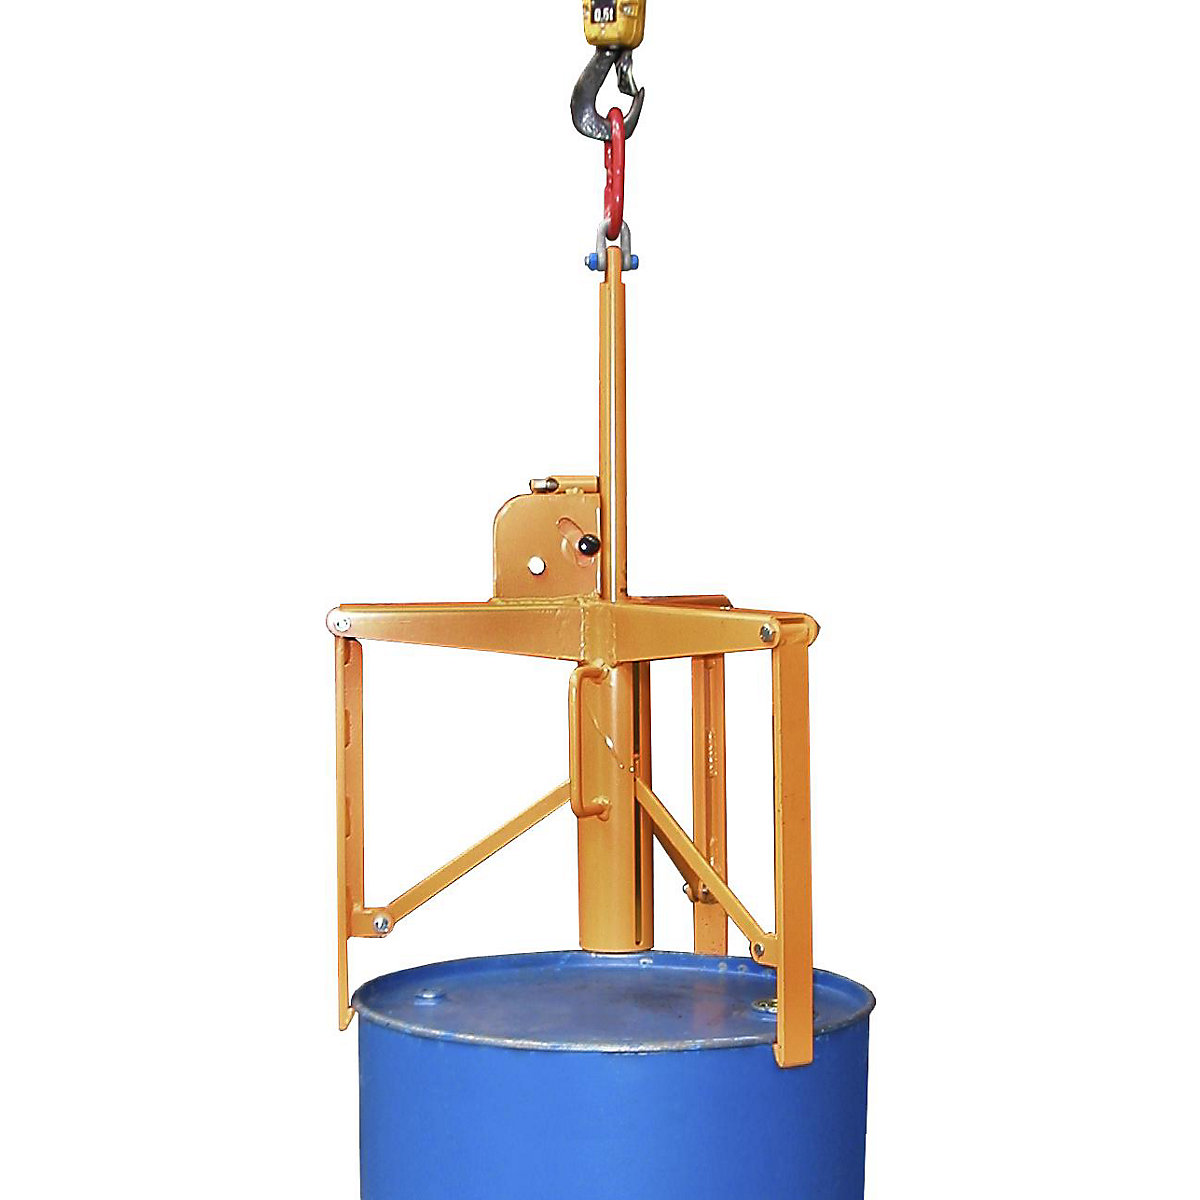 Drum gripper with 3-point clamping system – eurokraft pro